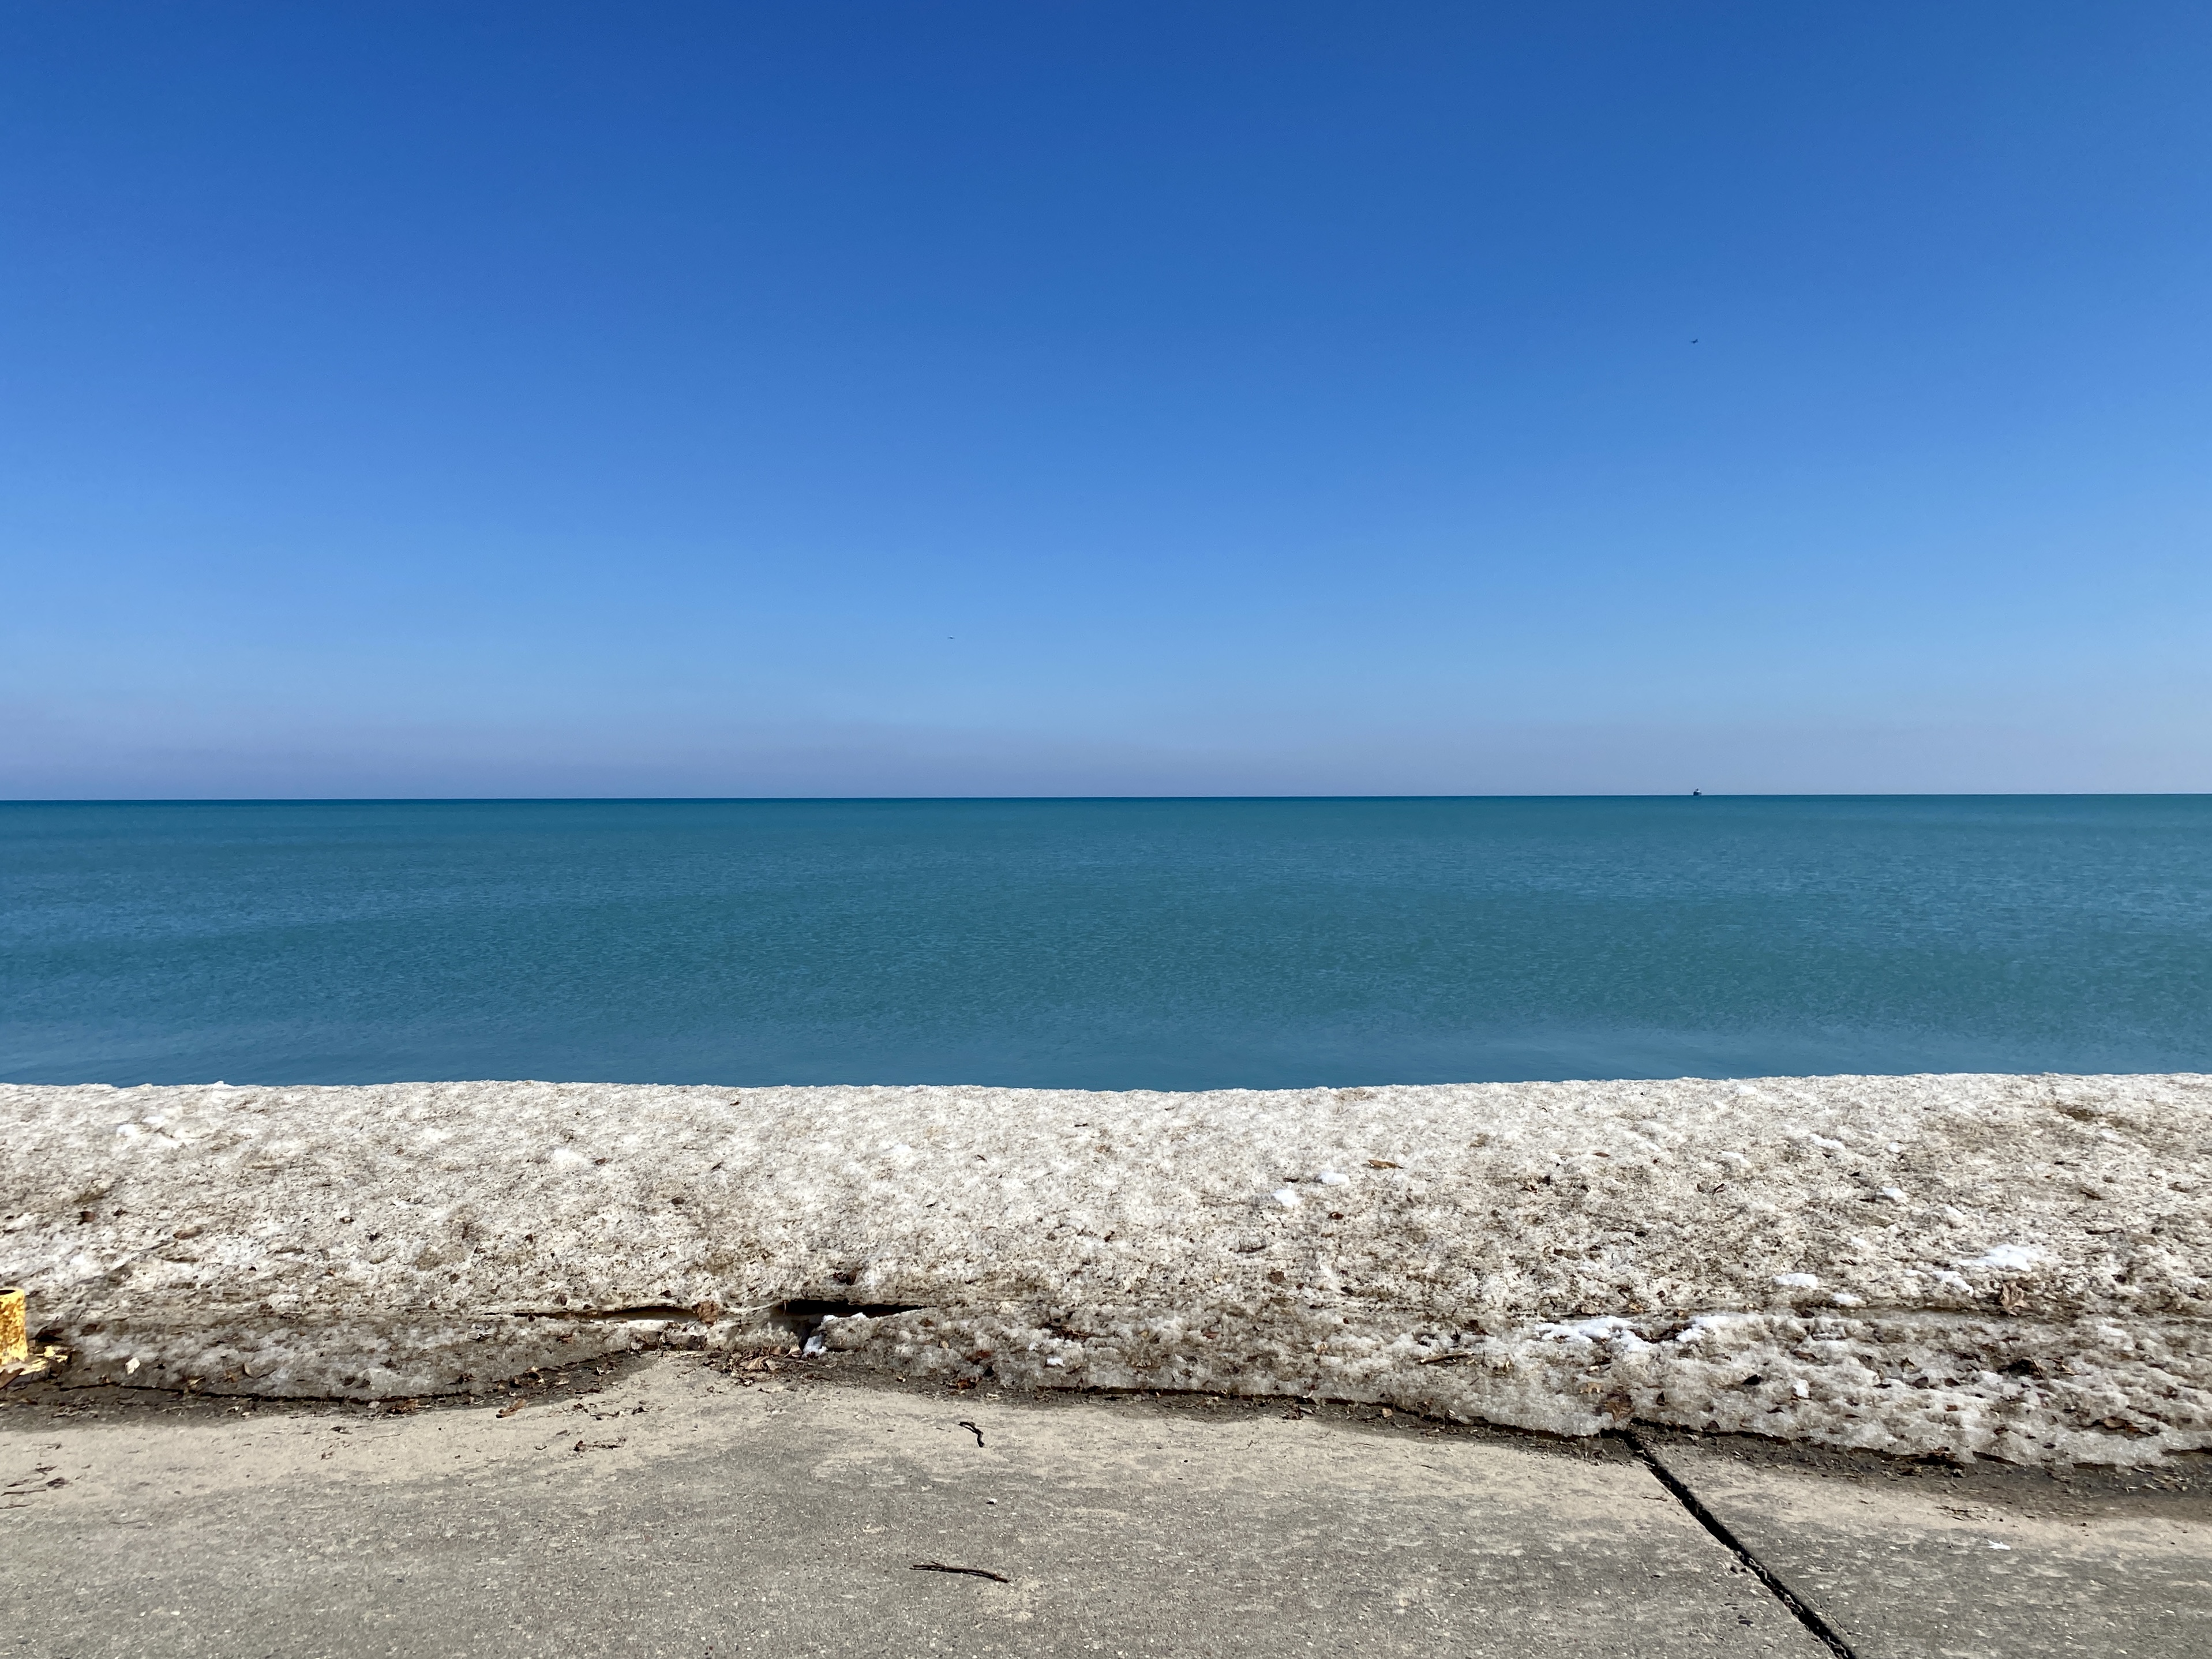 Horizon of large Lake Michigan with clear, deep blue sky, deep turquoise water and a shelf of snow in the foreground